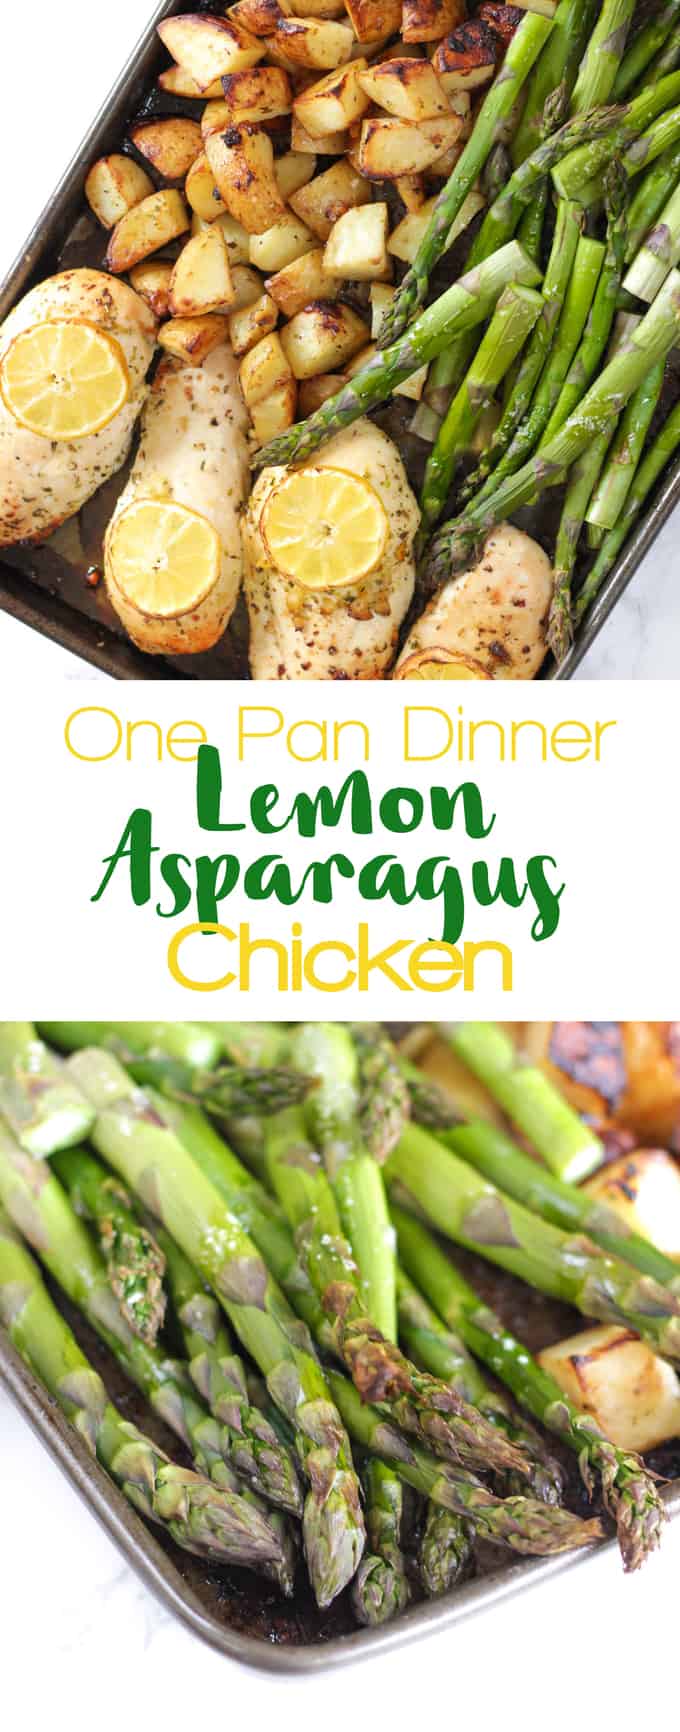 This One Pan Lemon Asparagus Chicken recipe is a quick and simple dinner using chicken breasts, roasted with crispy potatoes, asparagus, lemon and honey. Delicious, sticky, tasty, a really easy family meal.